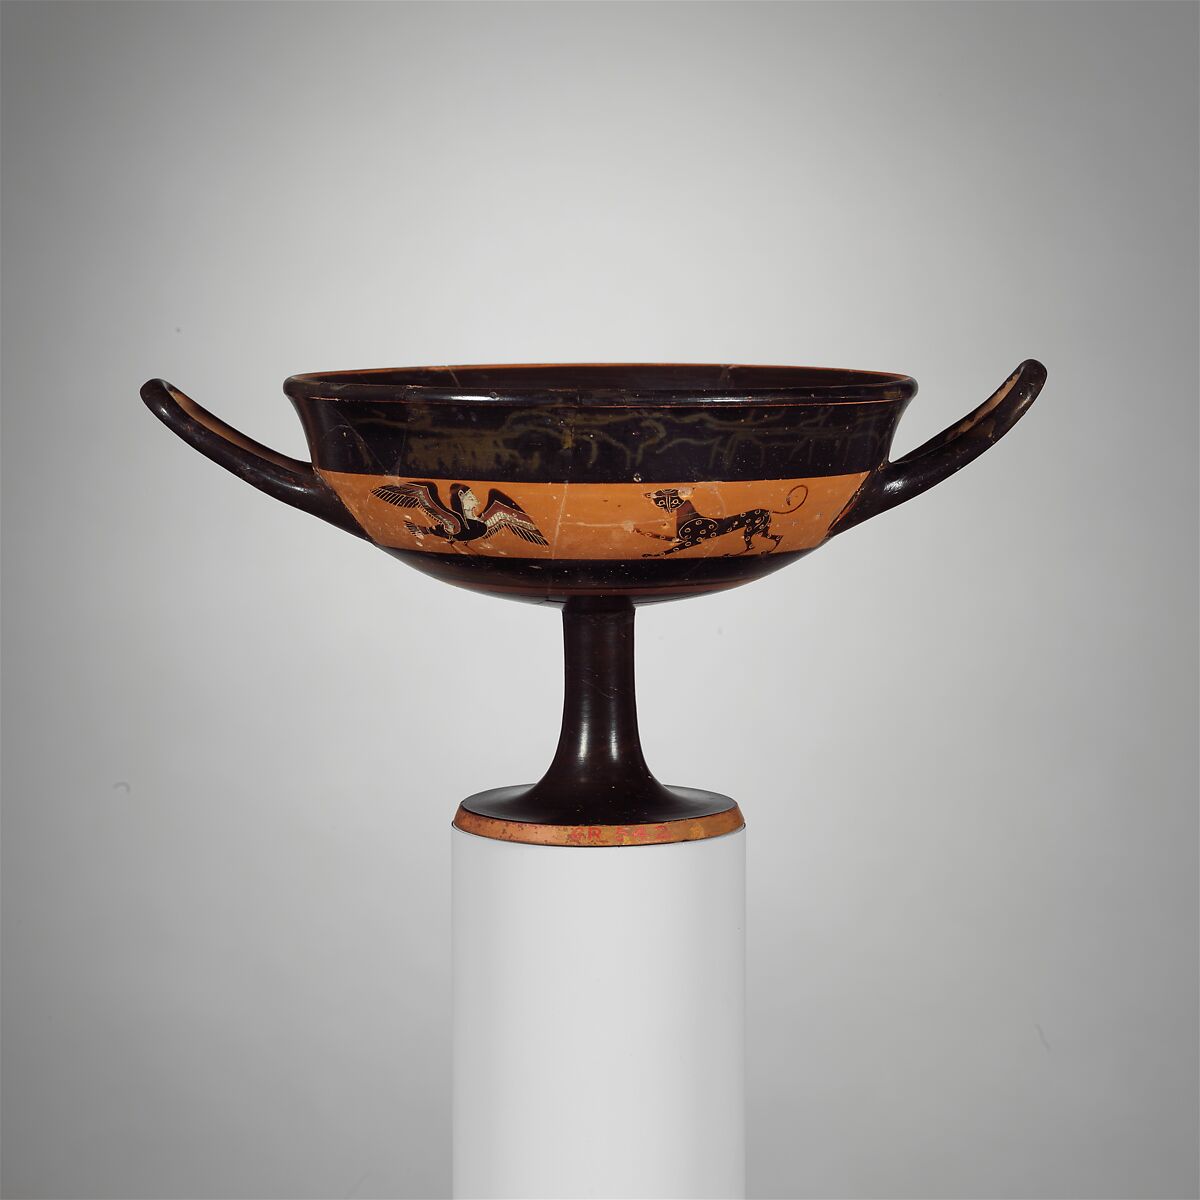 Terracotta kylix: band-cup (drinking cup), Attributed to the Tleson Painter, Terracotta, Greek, Attic 